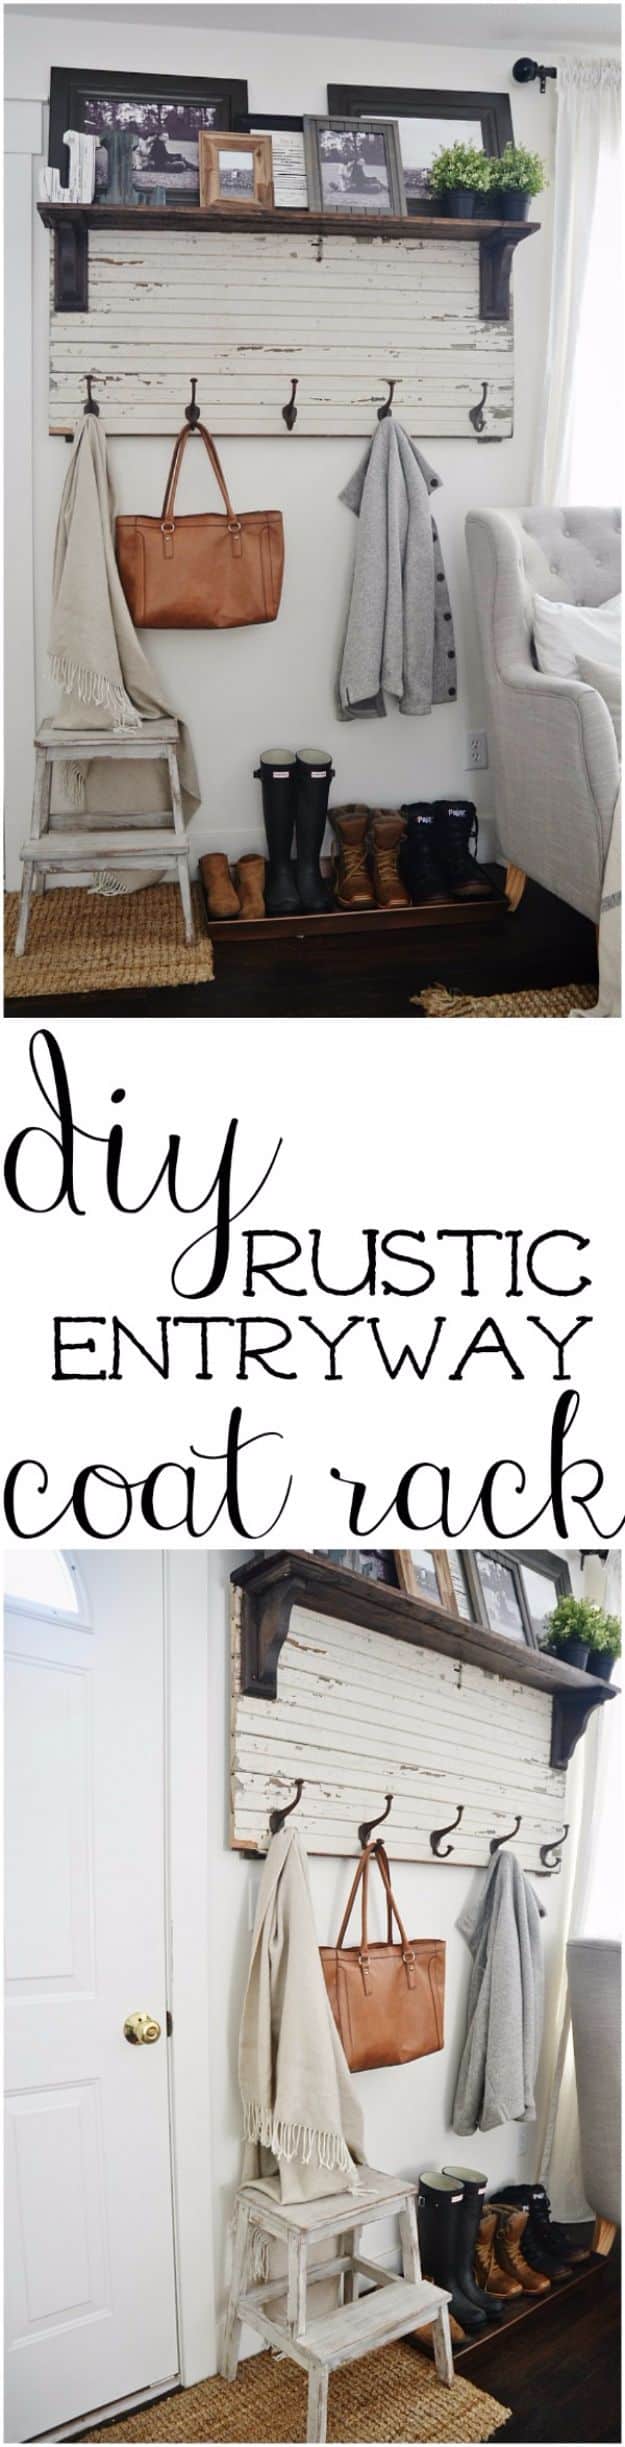 Best Country Decor Ideas - DIY Rustic Entryway Coat Rack - Rustic Farmhouse Decor Tutorials and Easy Vintage Shabby Chic Home Decor for Kitchen, Living Room and Bathroom - Creative Country Crafts, Rustic Wall Art and Accessories to Make and Sell 